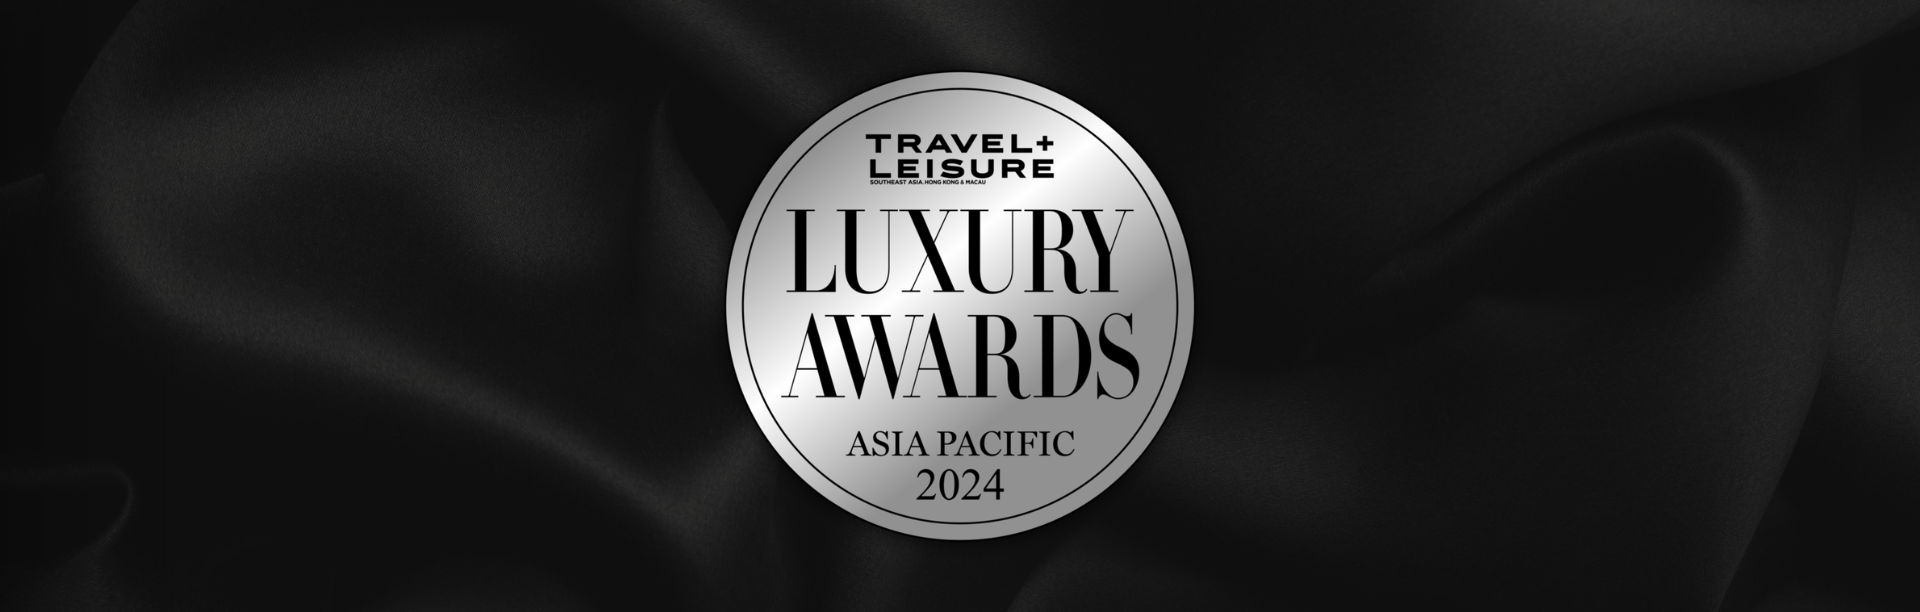 T+L Luxury Awards Asia Pacific 2024